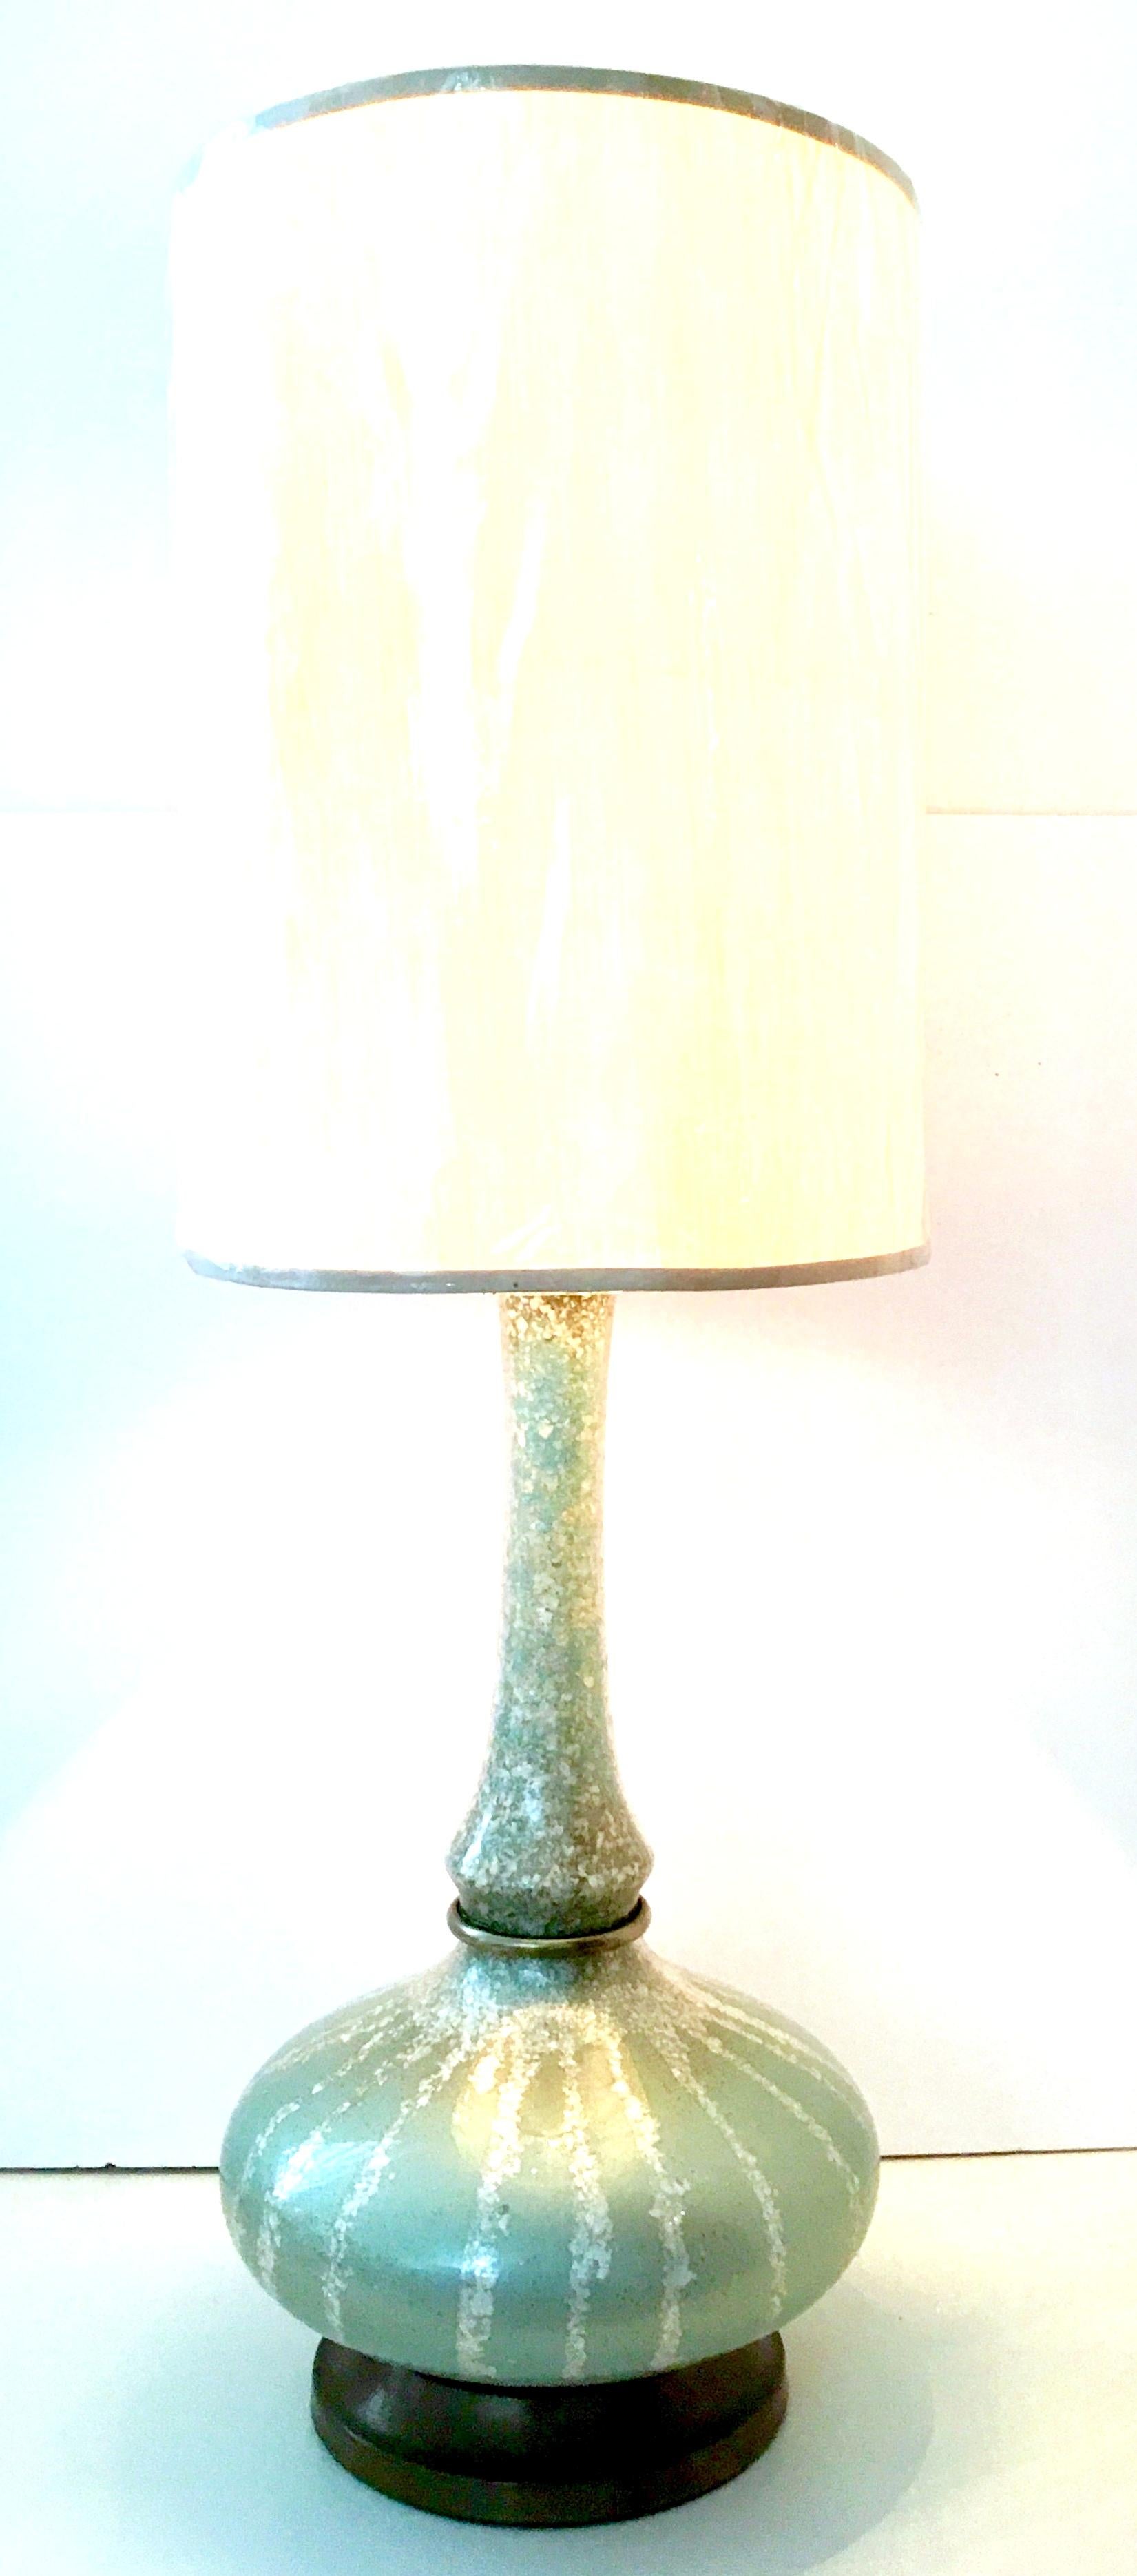 Mid-Century Reverse painted blown art glass and brass lamp. This metallic pistachio green with crushed mother of pearl shell and gold flecks reverse painted lamp features original brass fittings and base. Includes a brass harp and clear Lucite